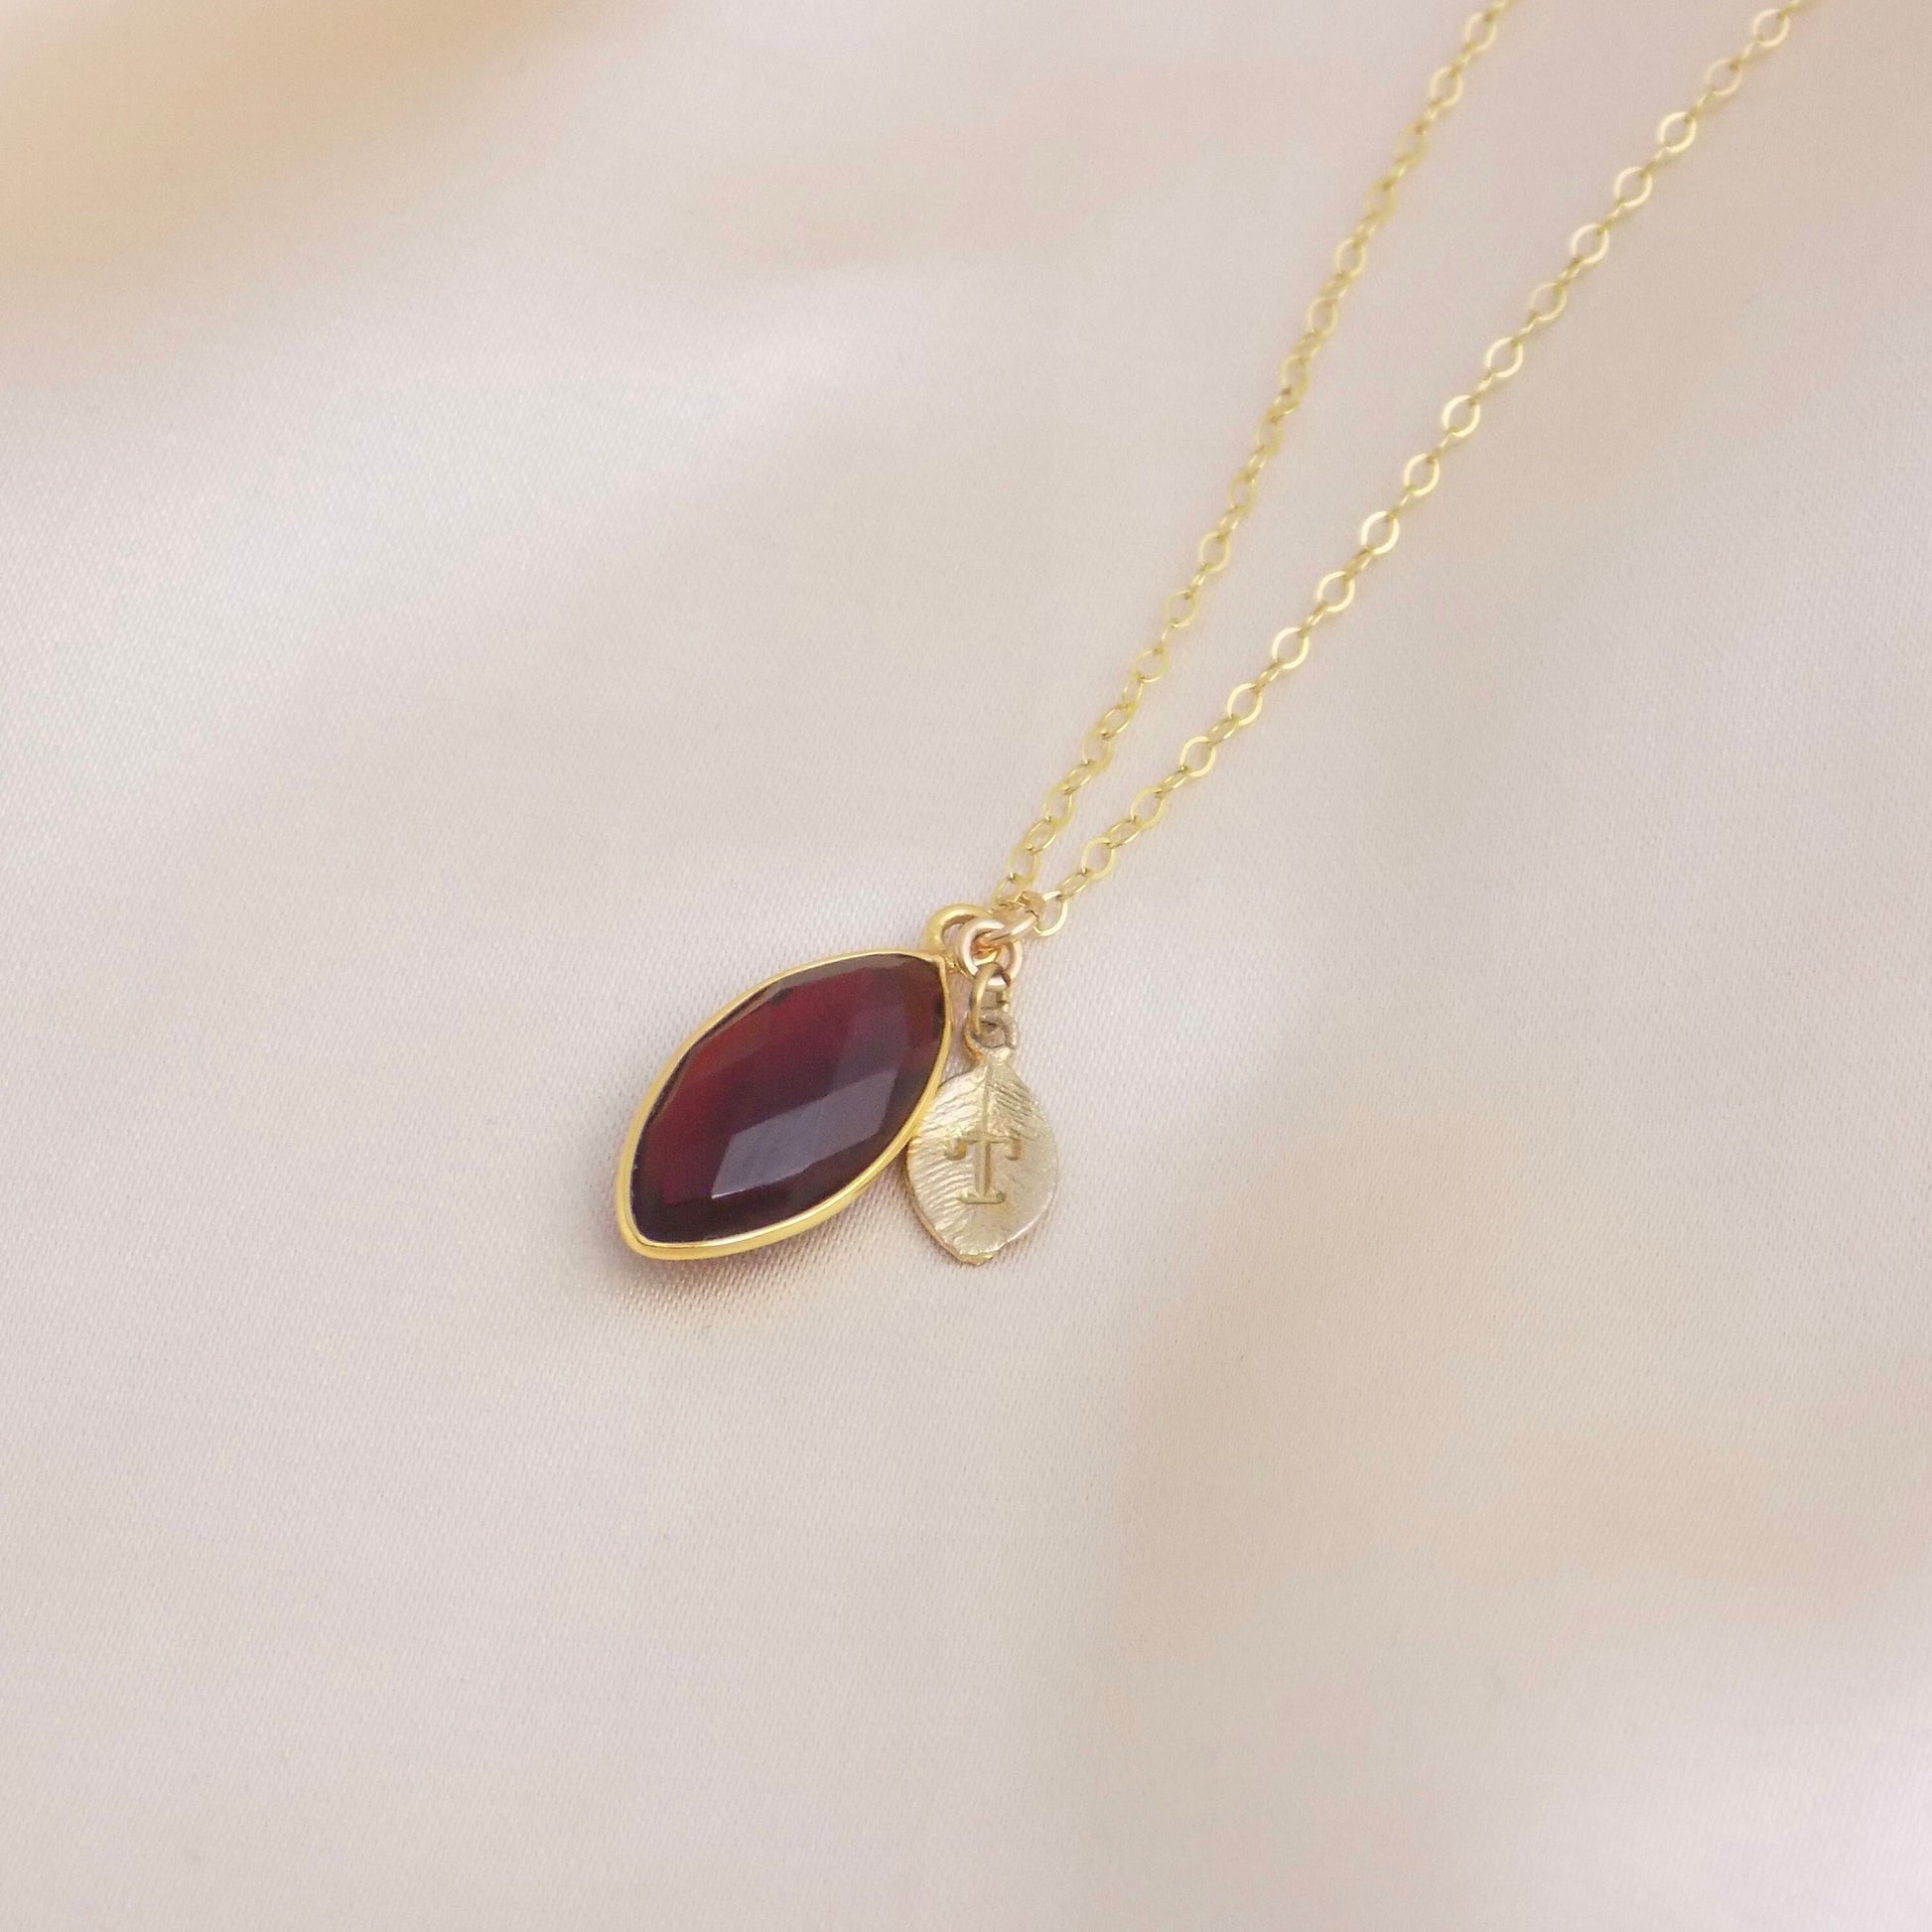 Christmas Gift, Garnet Necklace Gold Personalized, Dark Red Crystal Pendant, Bridesmaid Gift, M6-98